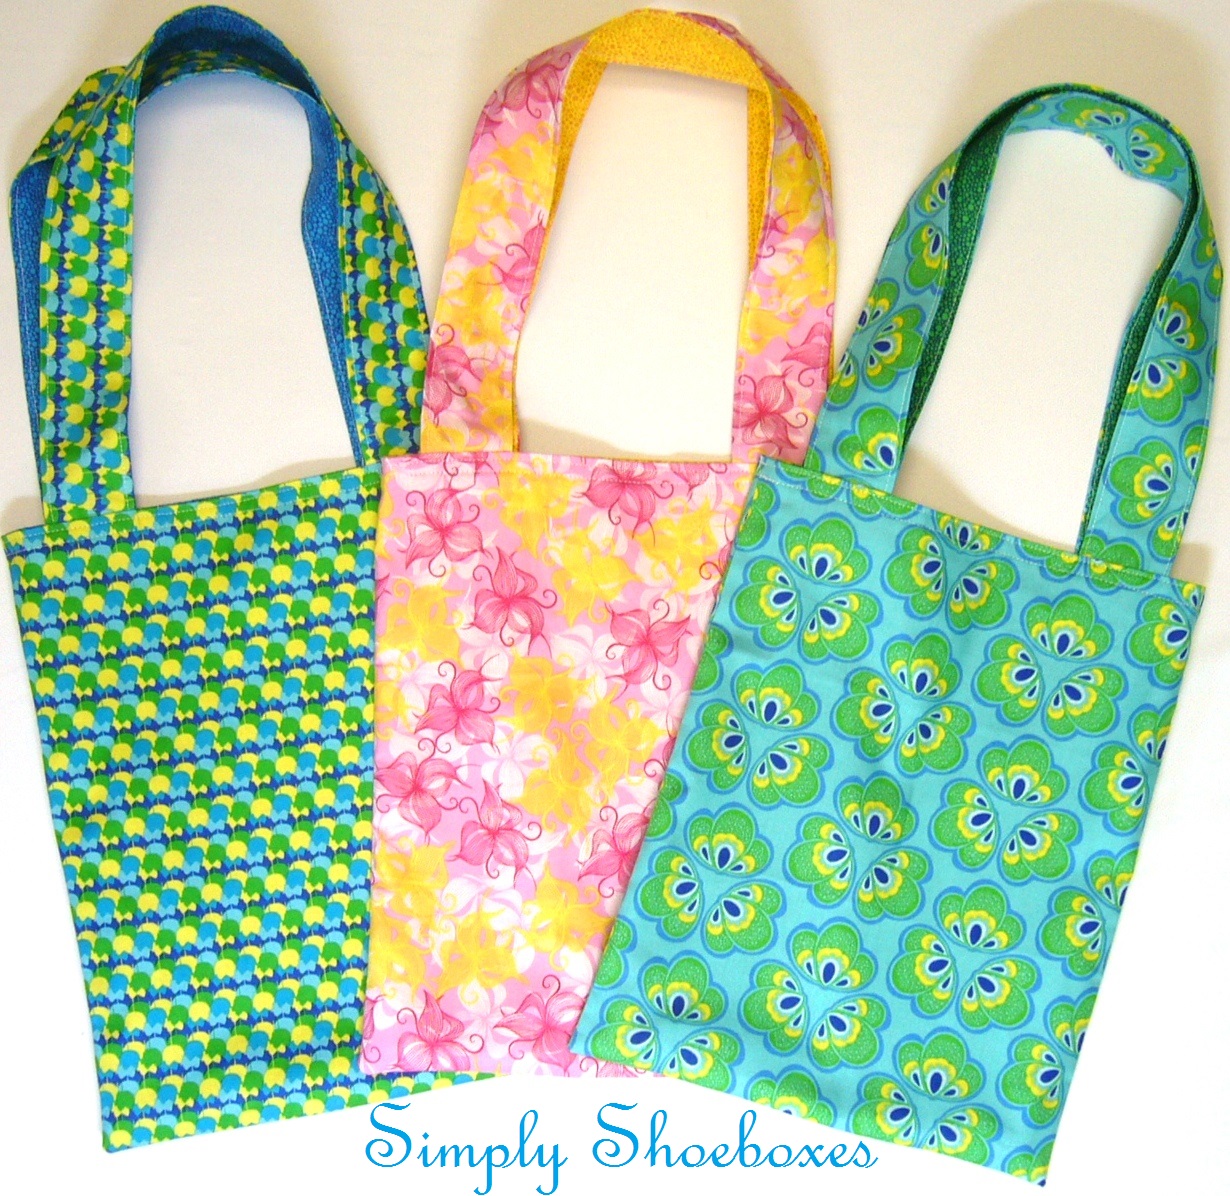 Long and Short Handled Bag Tutorial — Sum of their Stories Craft Blog